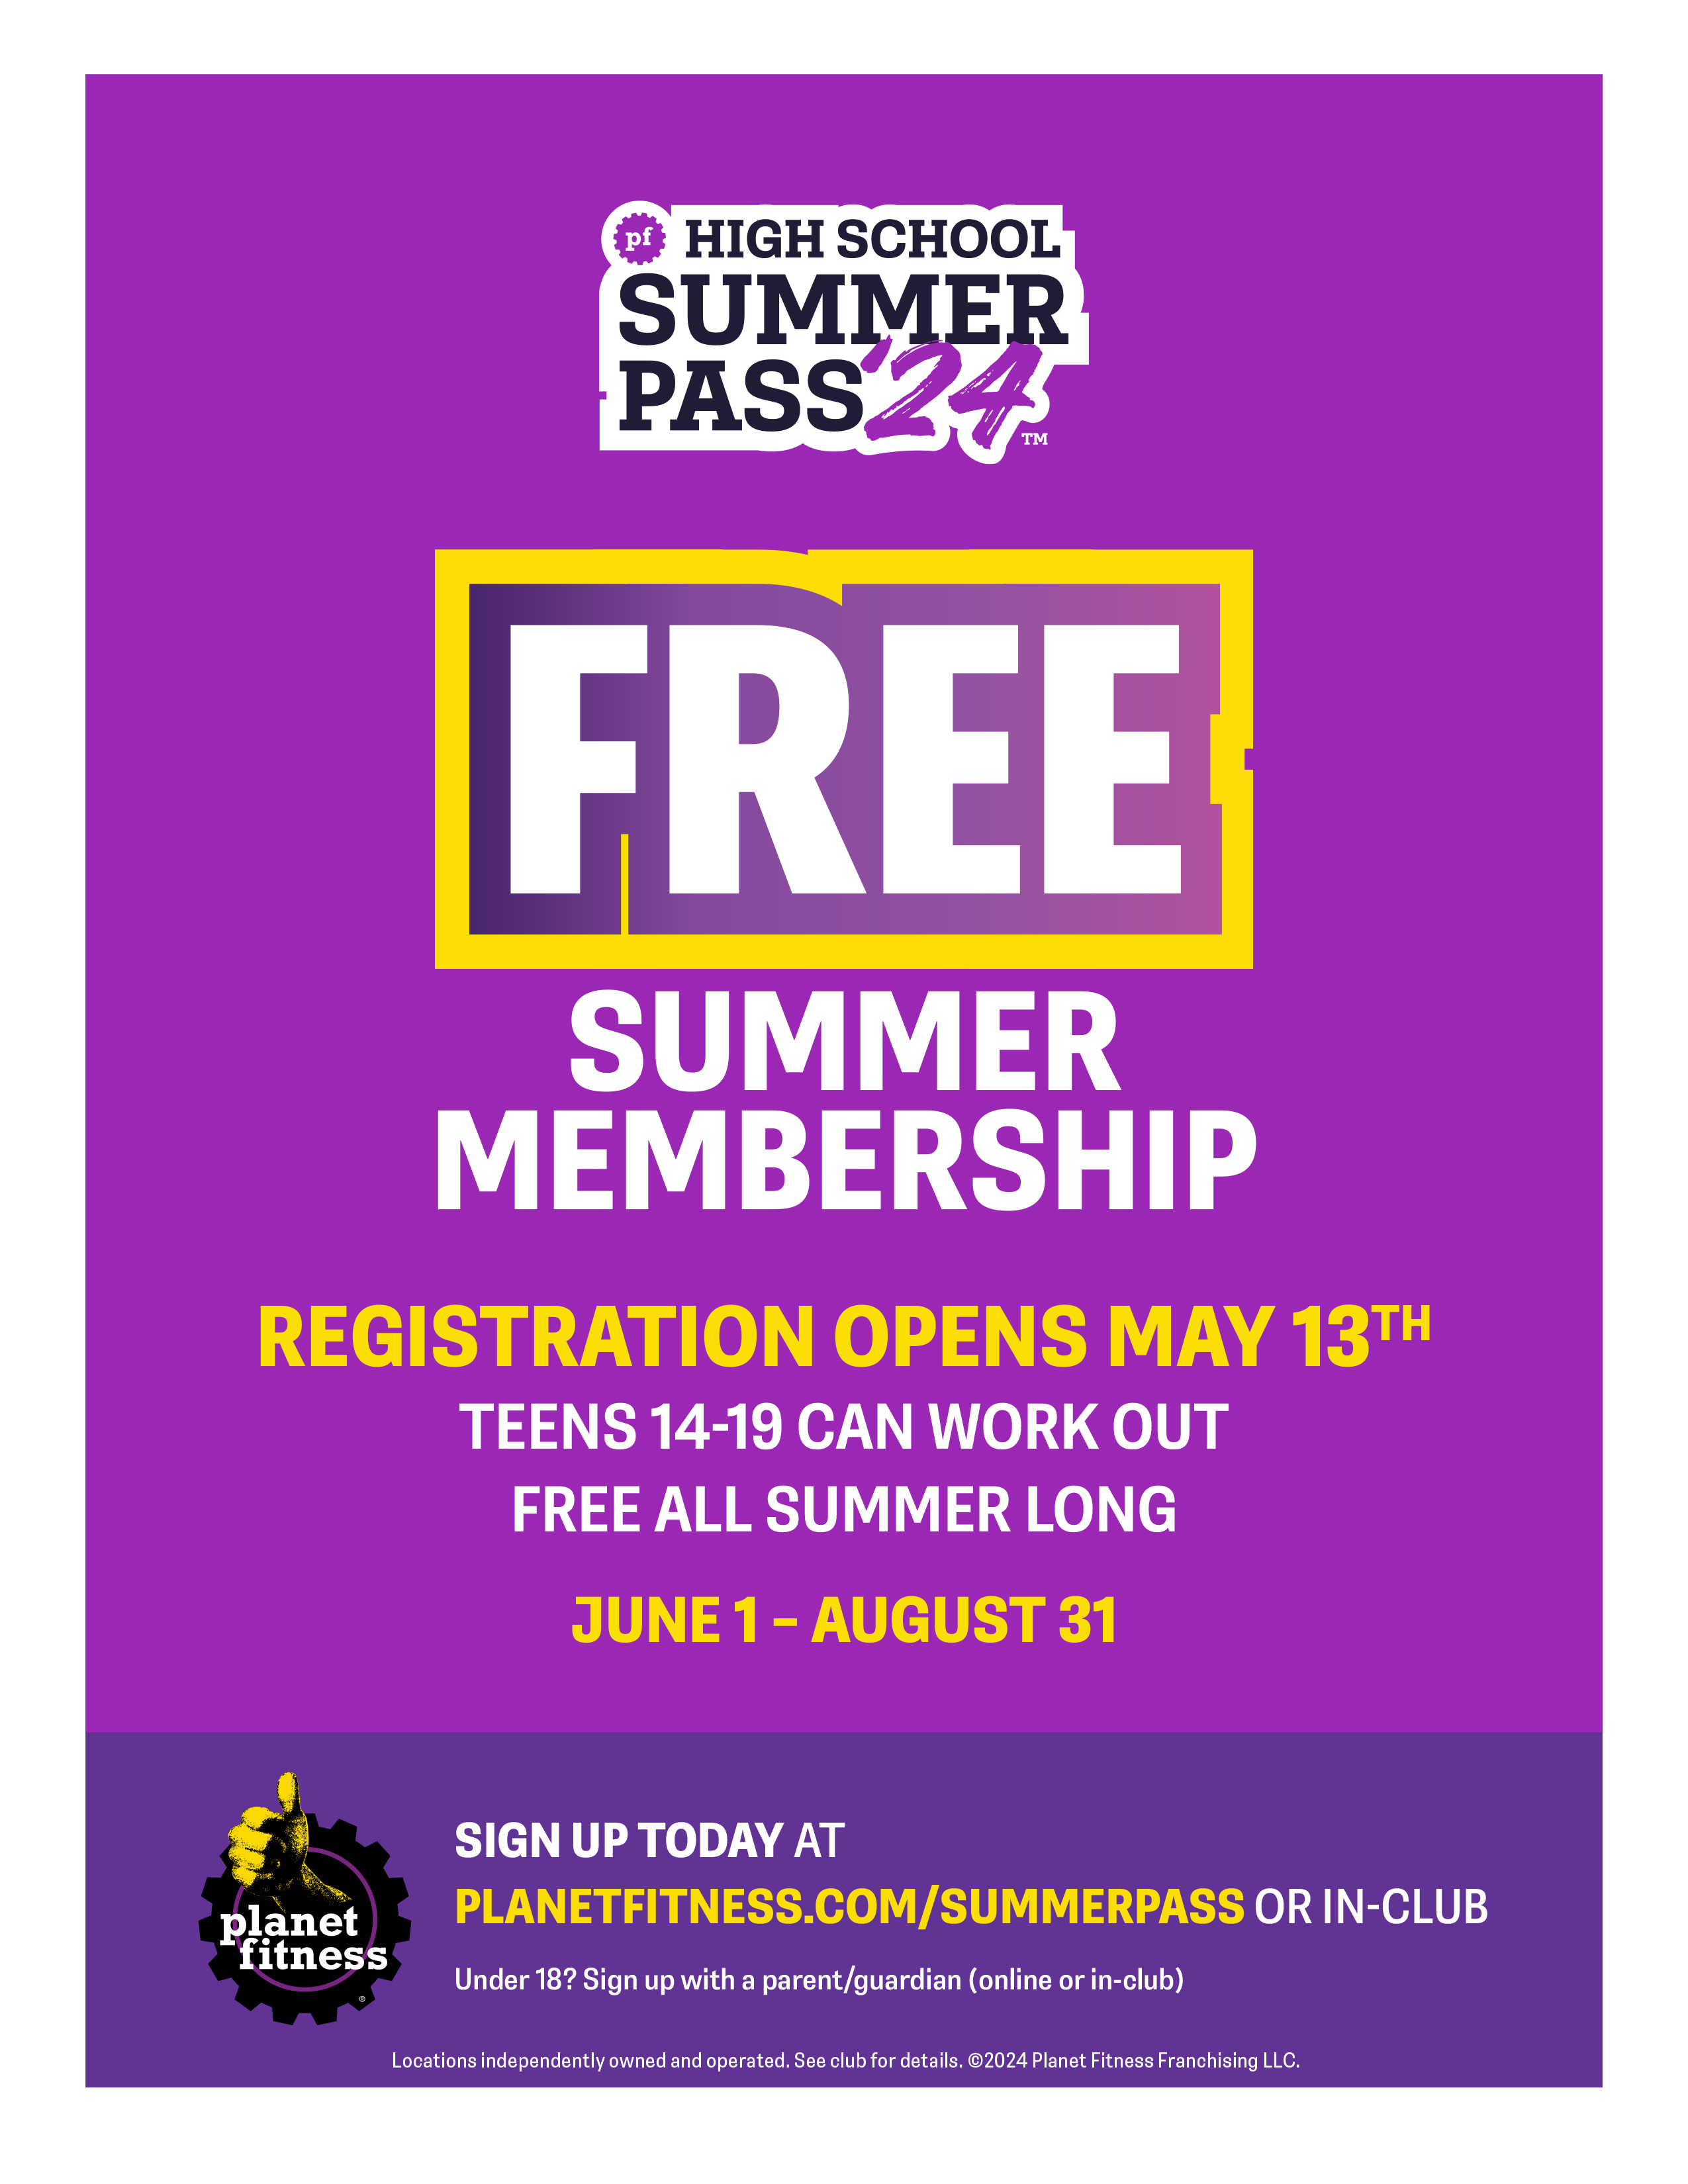 Planet Fitness Summer Pass Provides IHSA Students With Free Summer Access